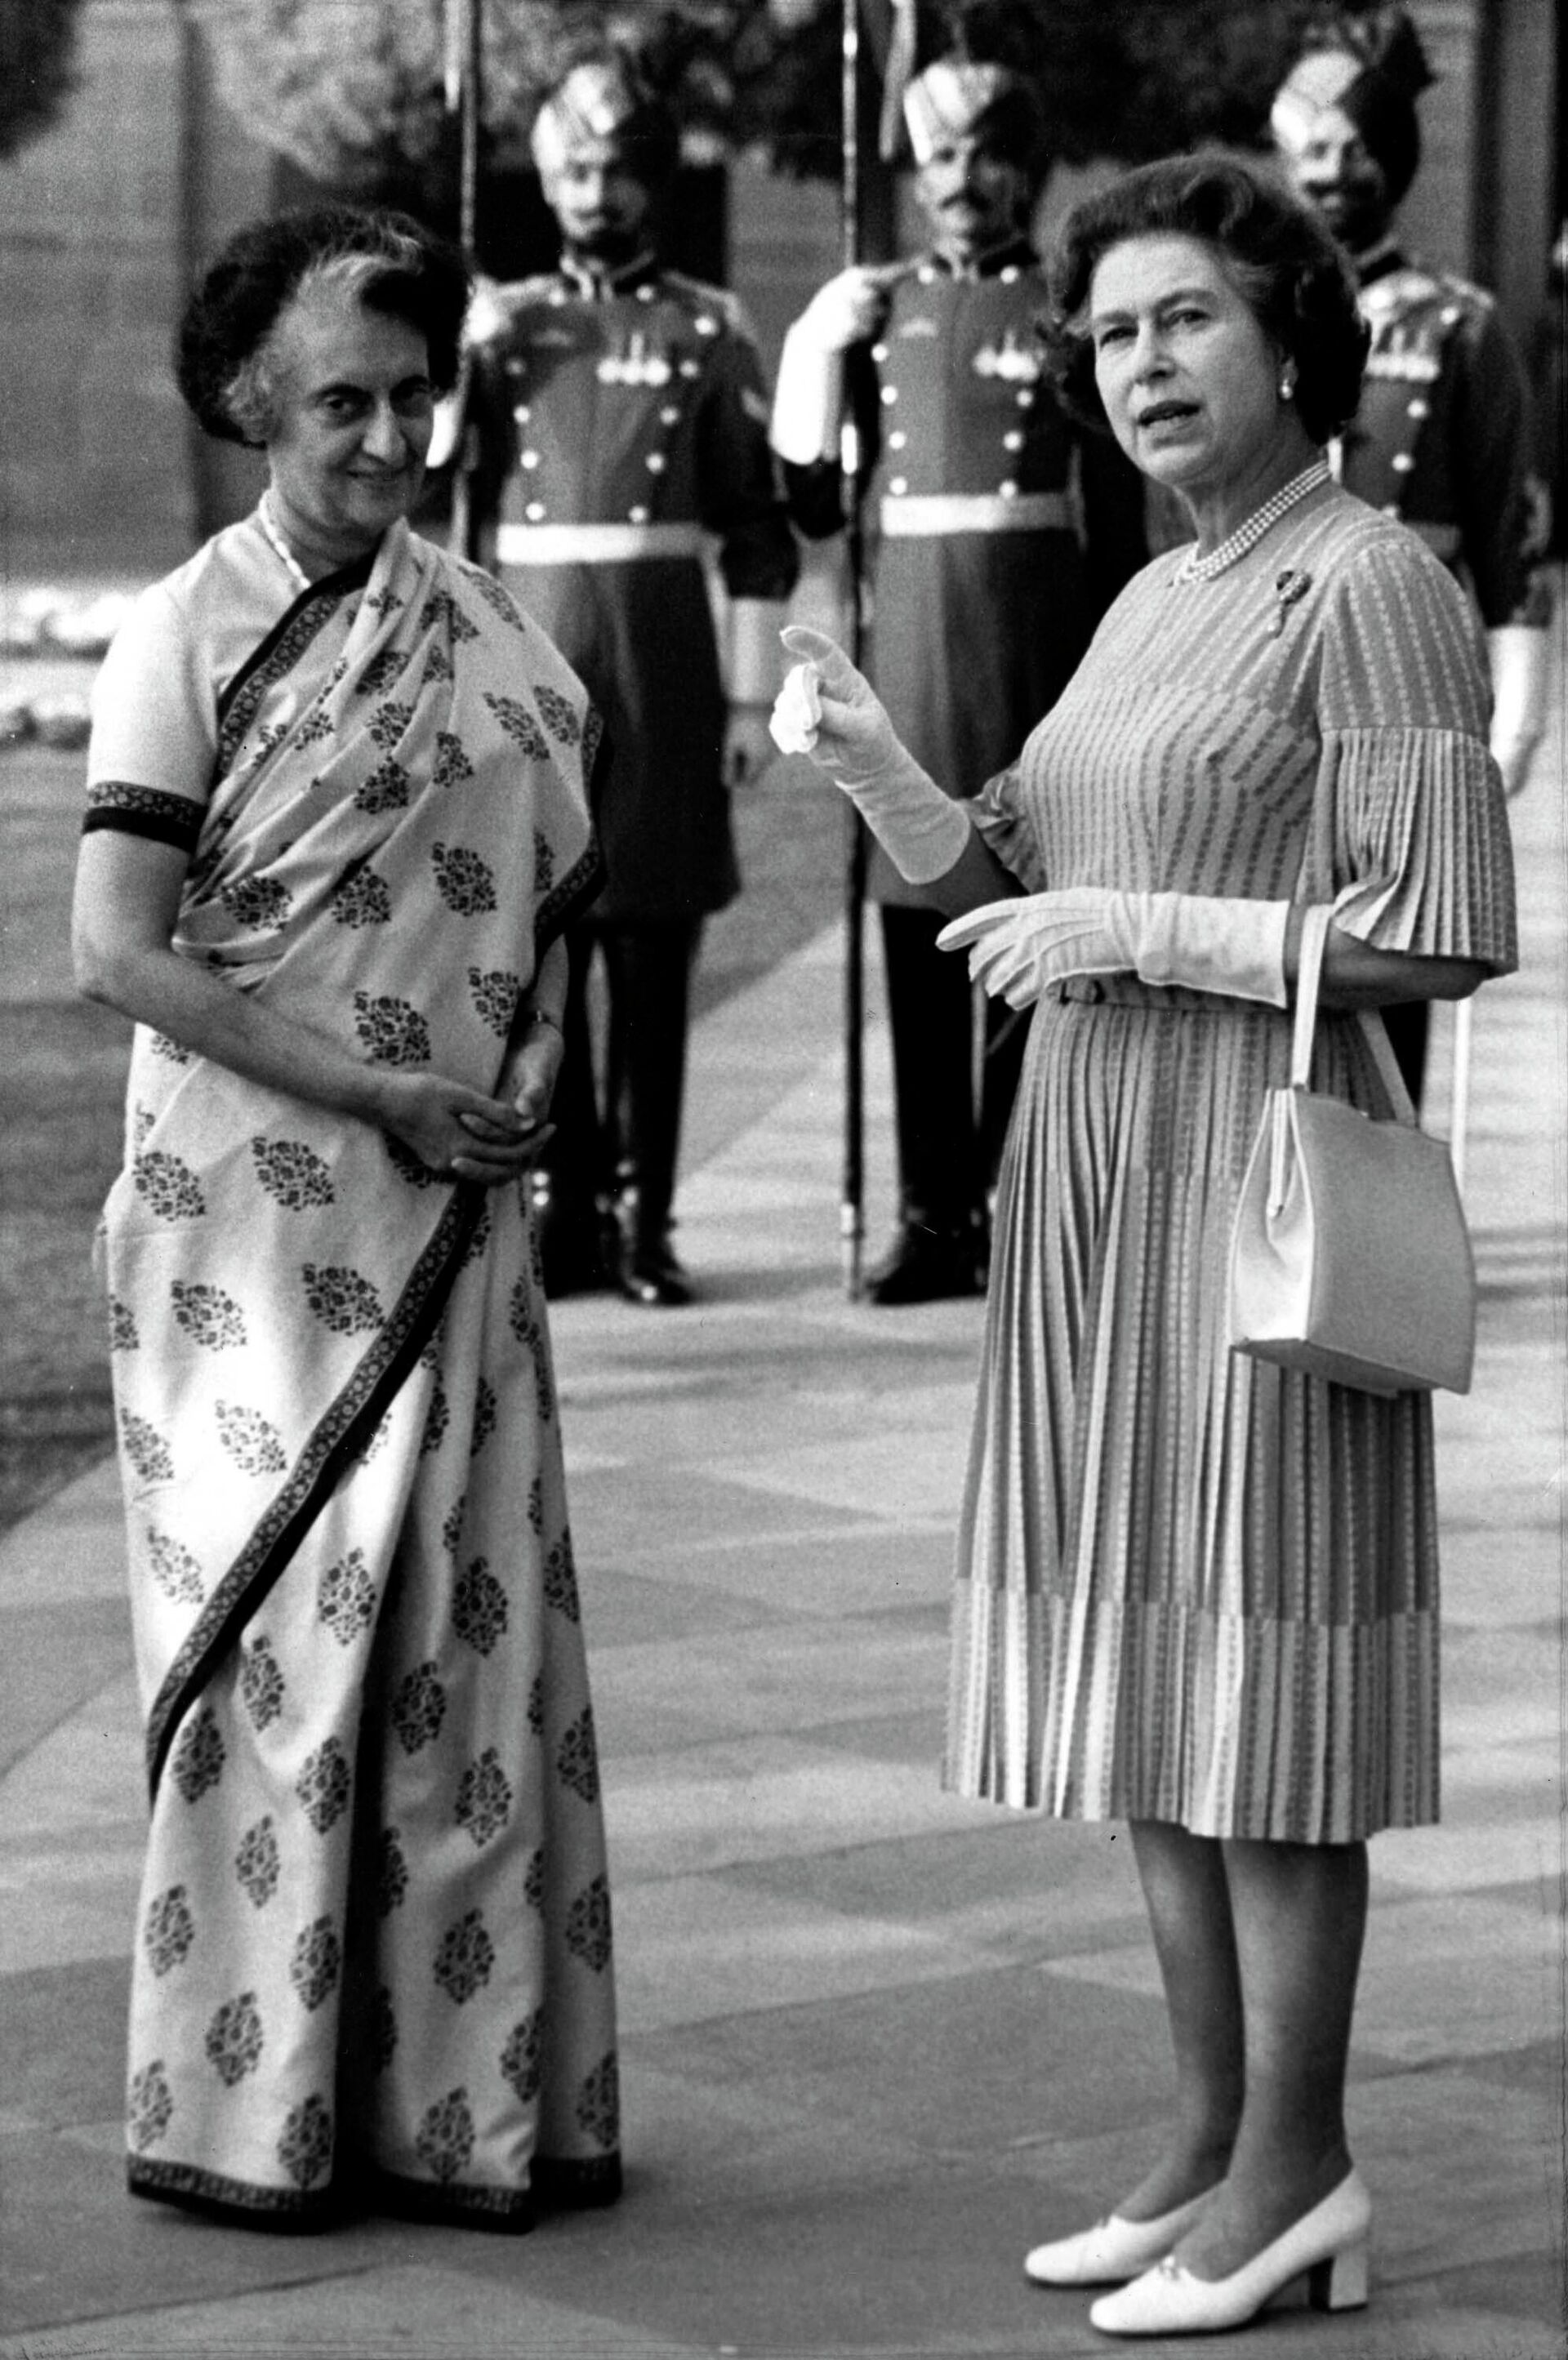 FILE - In this Nov. 17, 1983 file photo, Britain's Queen Elizabeth II, right, gestures as she talks to Indian Prime Minister, Indira Gandhi, at the Rashtrapati Bhavan, the President's Palace in Delhi, during the first day of her visit to India.  Queen Elizabeth II, Britain’s longest-reigning monarch and a rock of stability across much of a turbulent century, has died. She was 96. Buckingham Palace made the announcement in a statement on Thursday Sept. 8, 2022 - Sputnik International, 1920, 09.09.2022